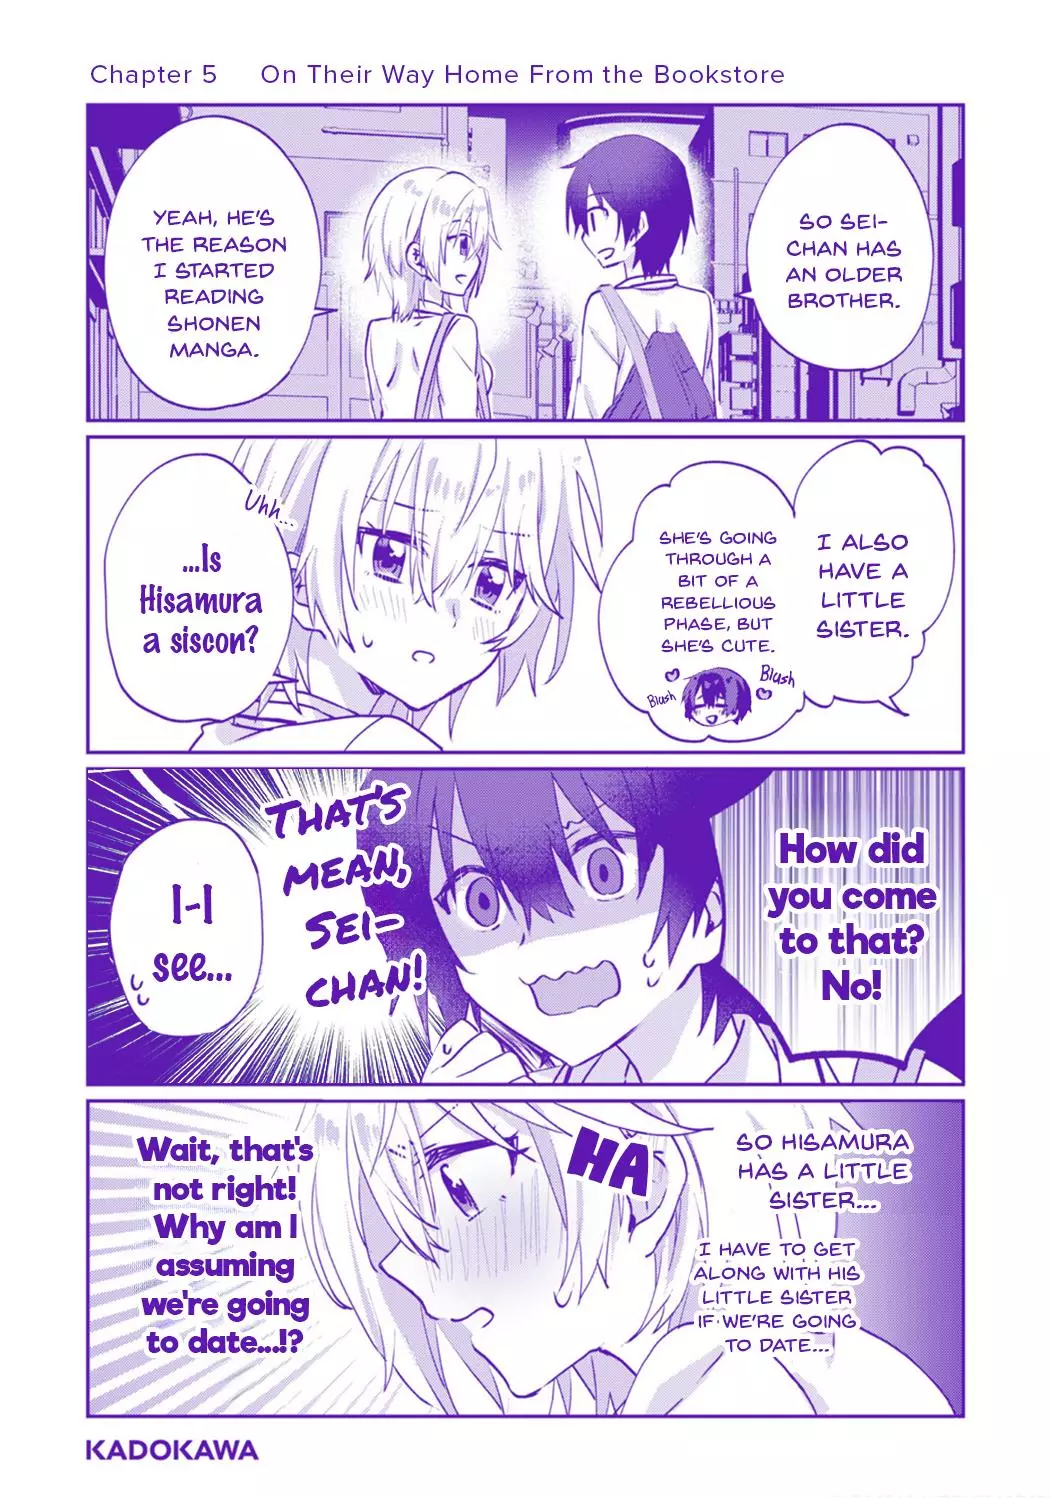 Since I’Ve Entered The World Of Romantic Comedy Manga, I’Ll Do My Best To Make The Losing Heroine Happy - 6.5 page 15-89a6d77c